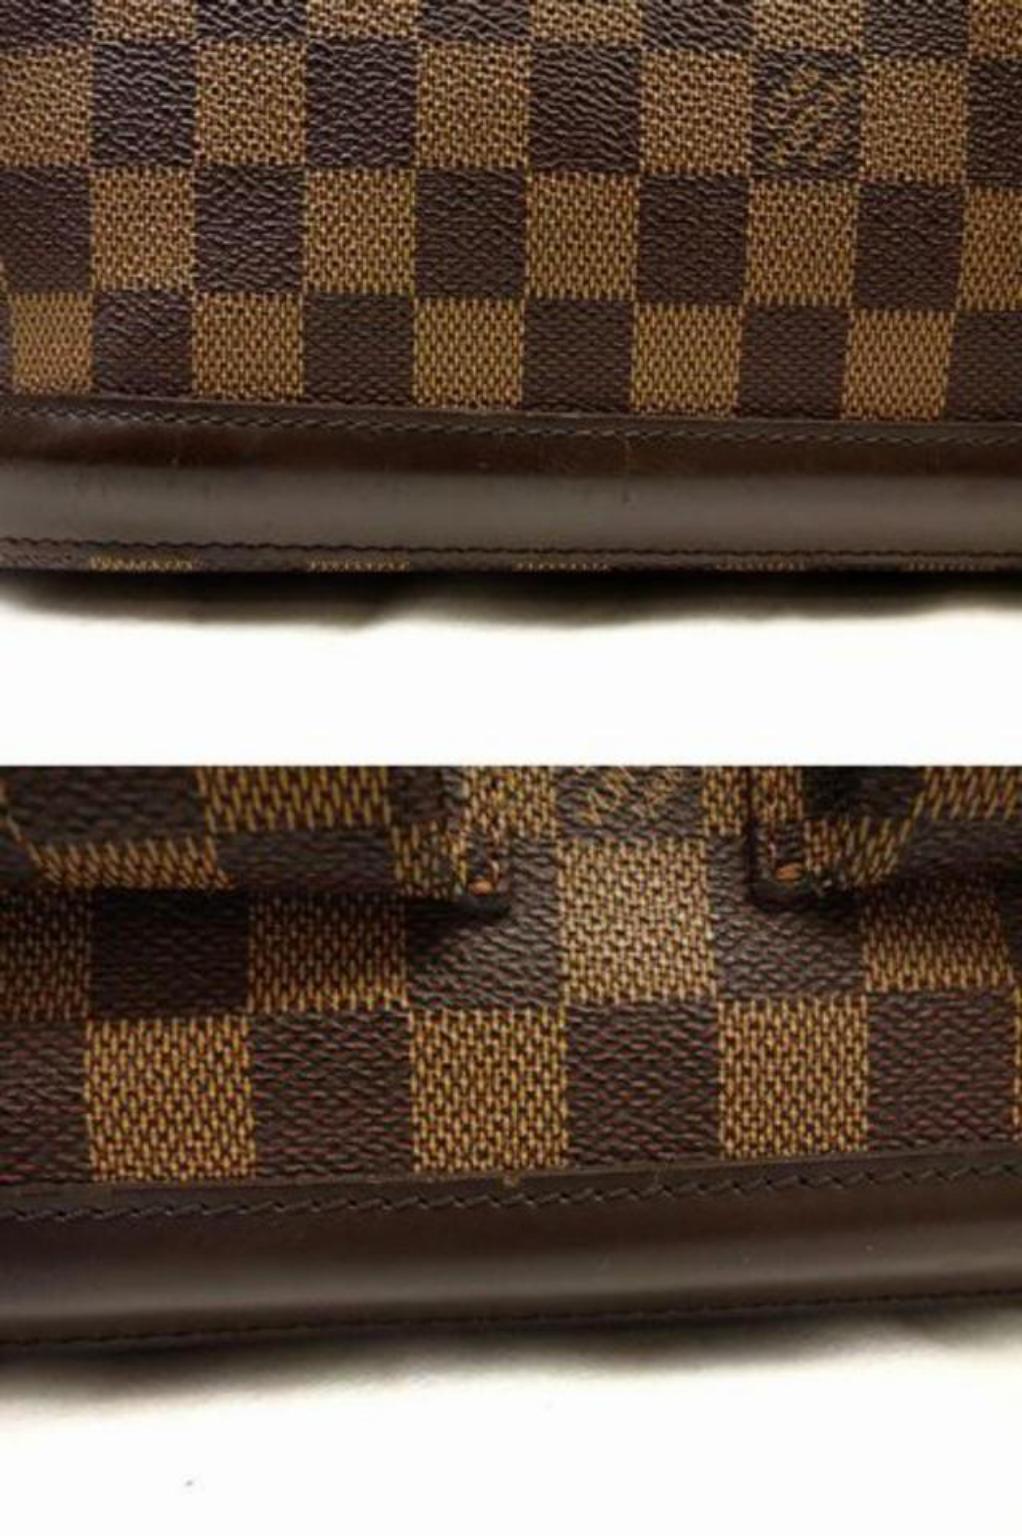 Louis Vuitton Manosque Damier Ebene Gm 223979 Brown Coated Canvas Tote For Sale 6